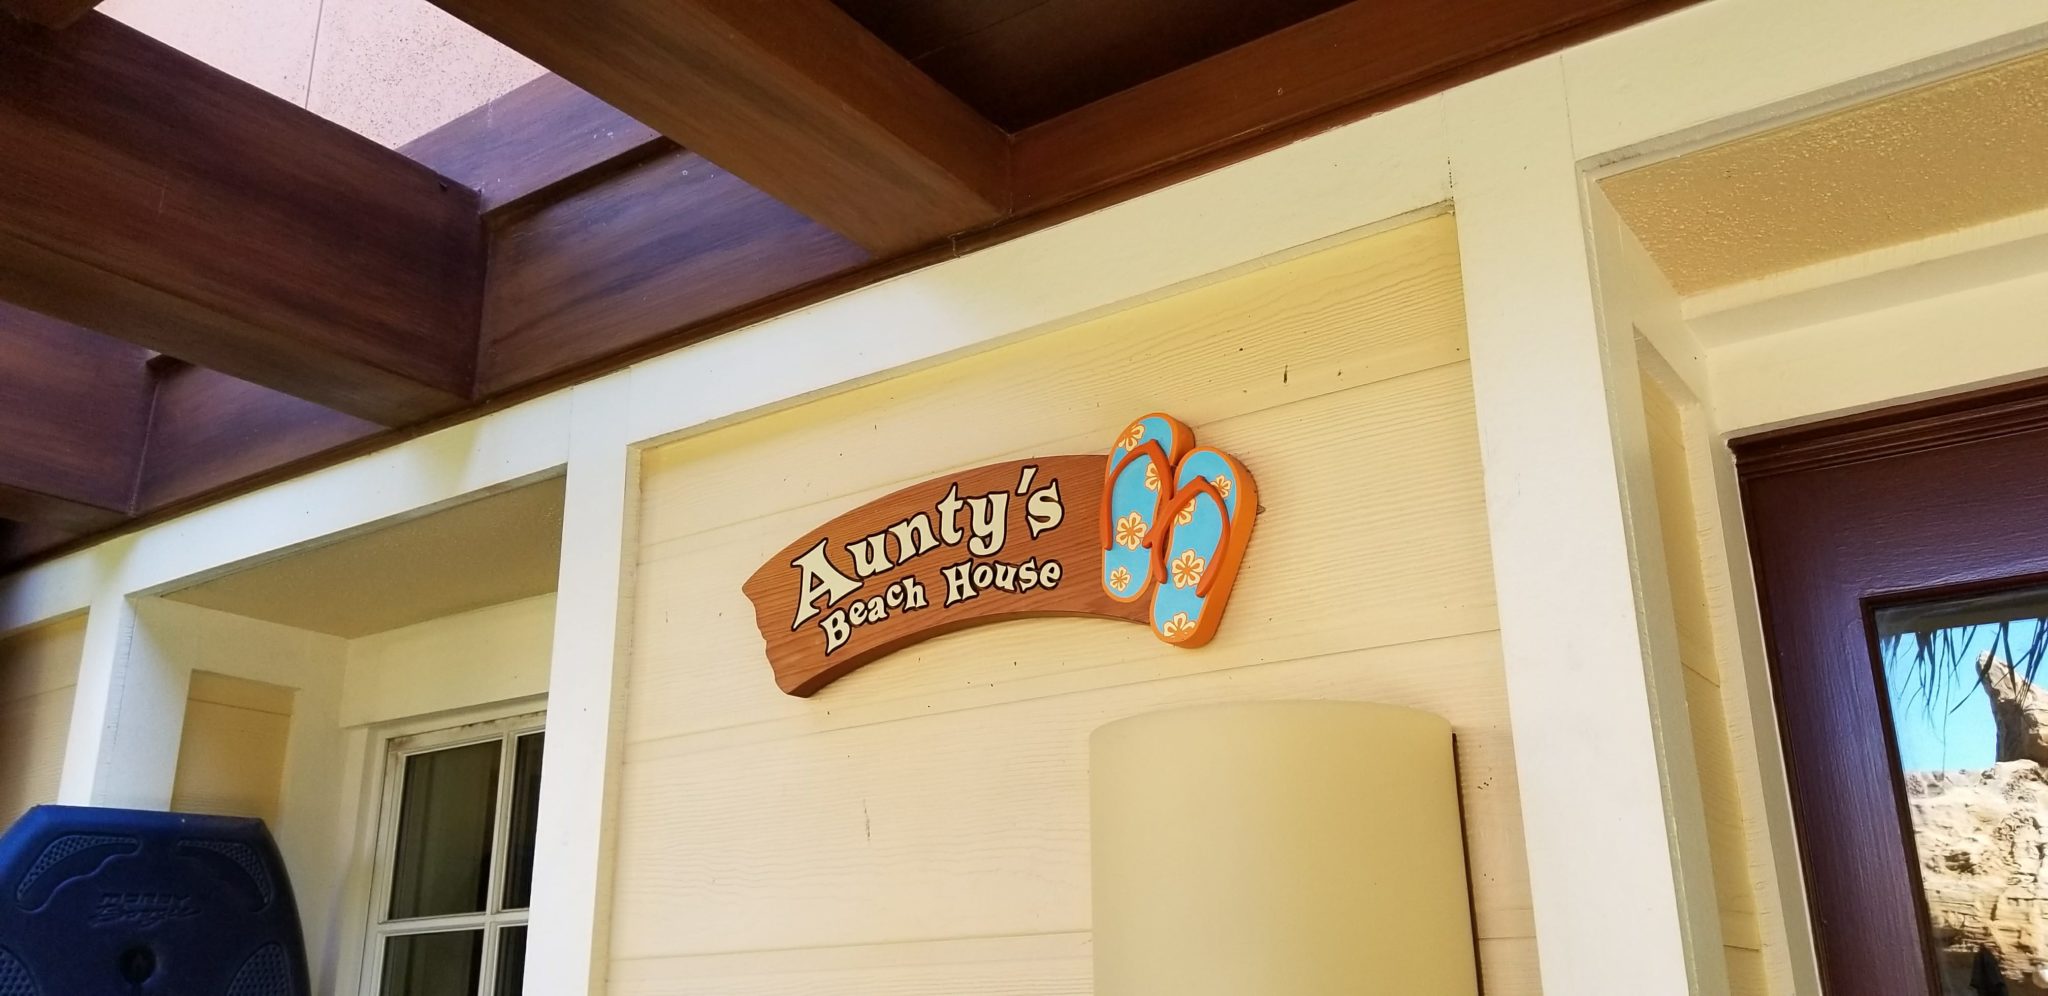 Aunty’s Beach House at Disney’s Aluani Resort Provides Extra Magic for Little Travelers